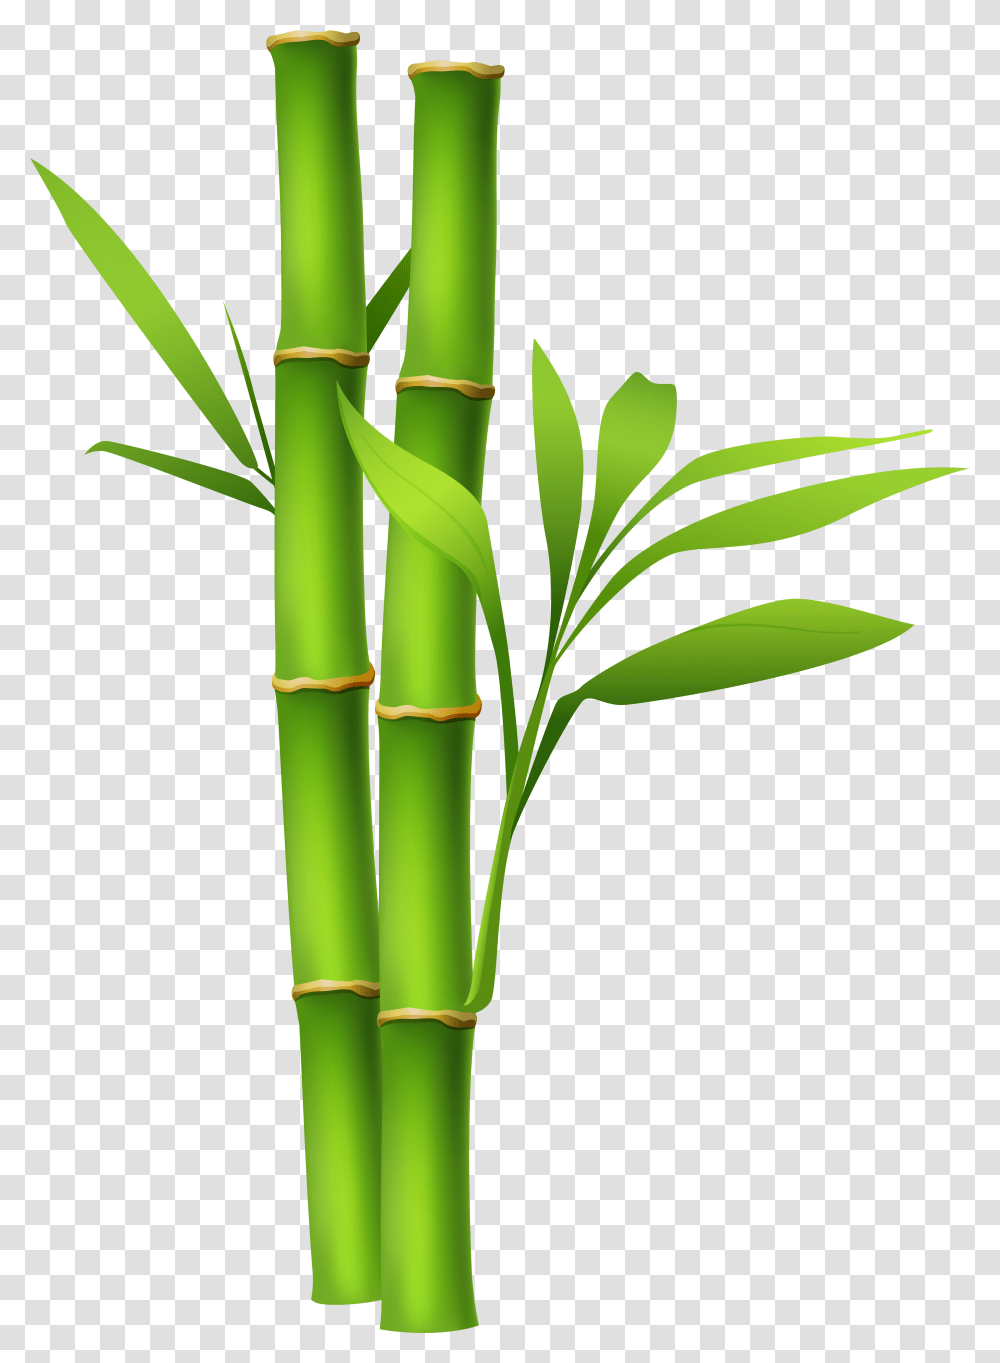 Library Of Bamboo Tree Image Bamboo, Plant Transparent Png